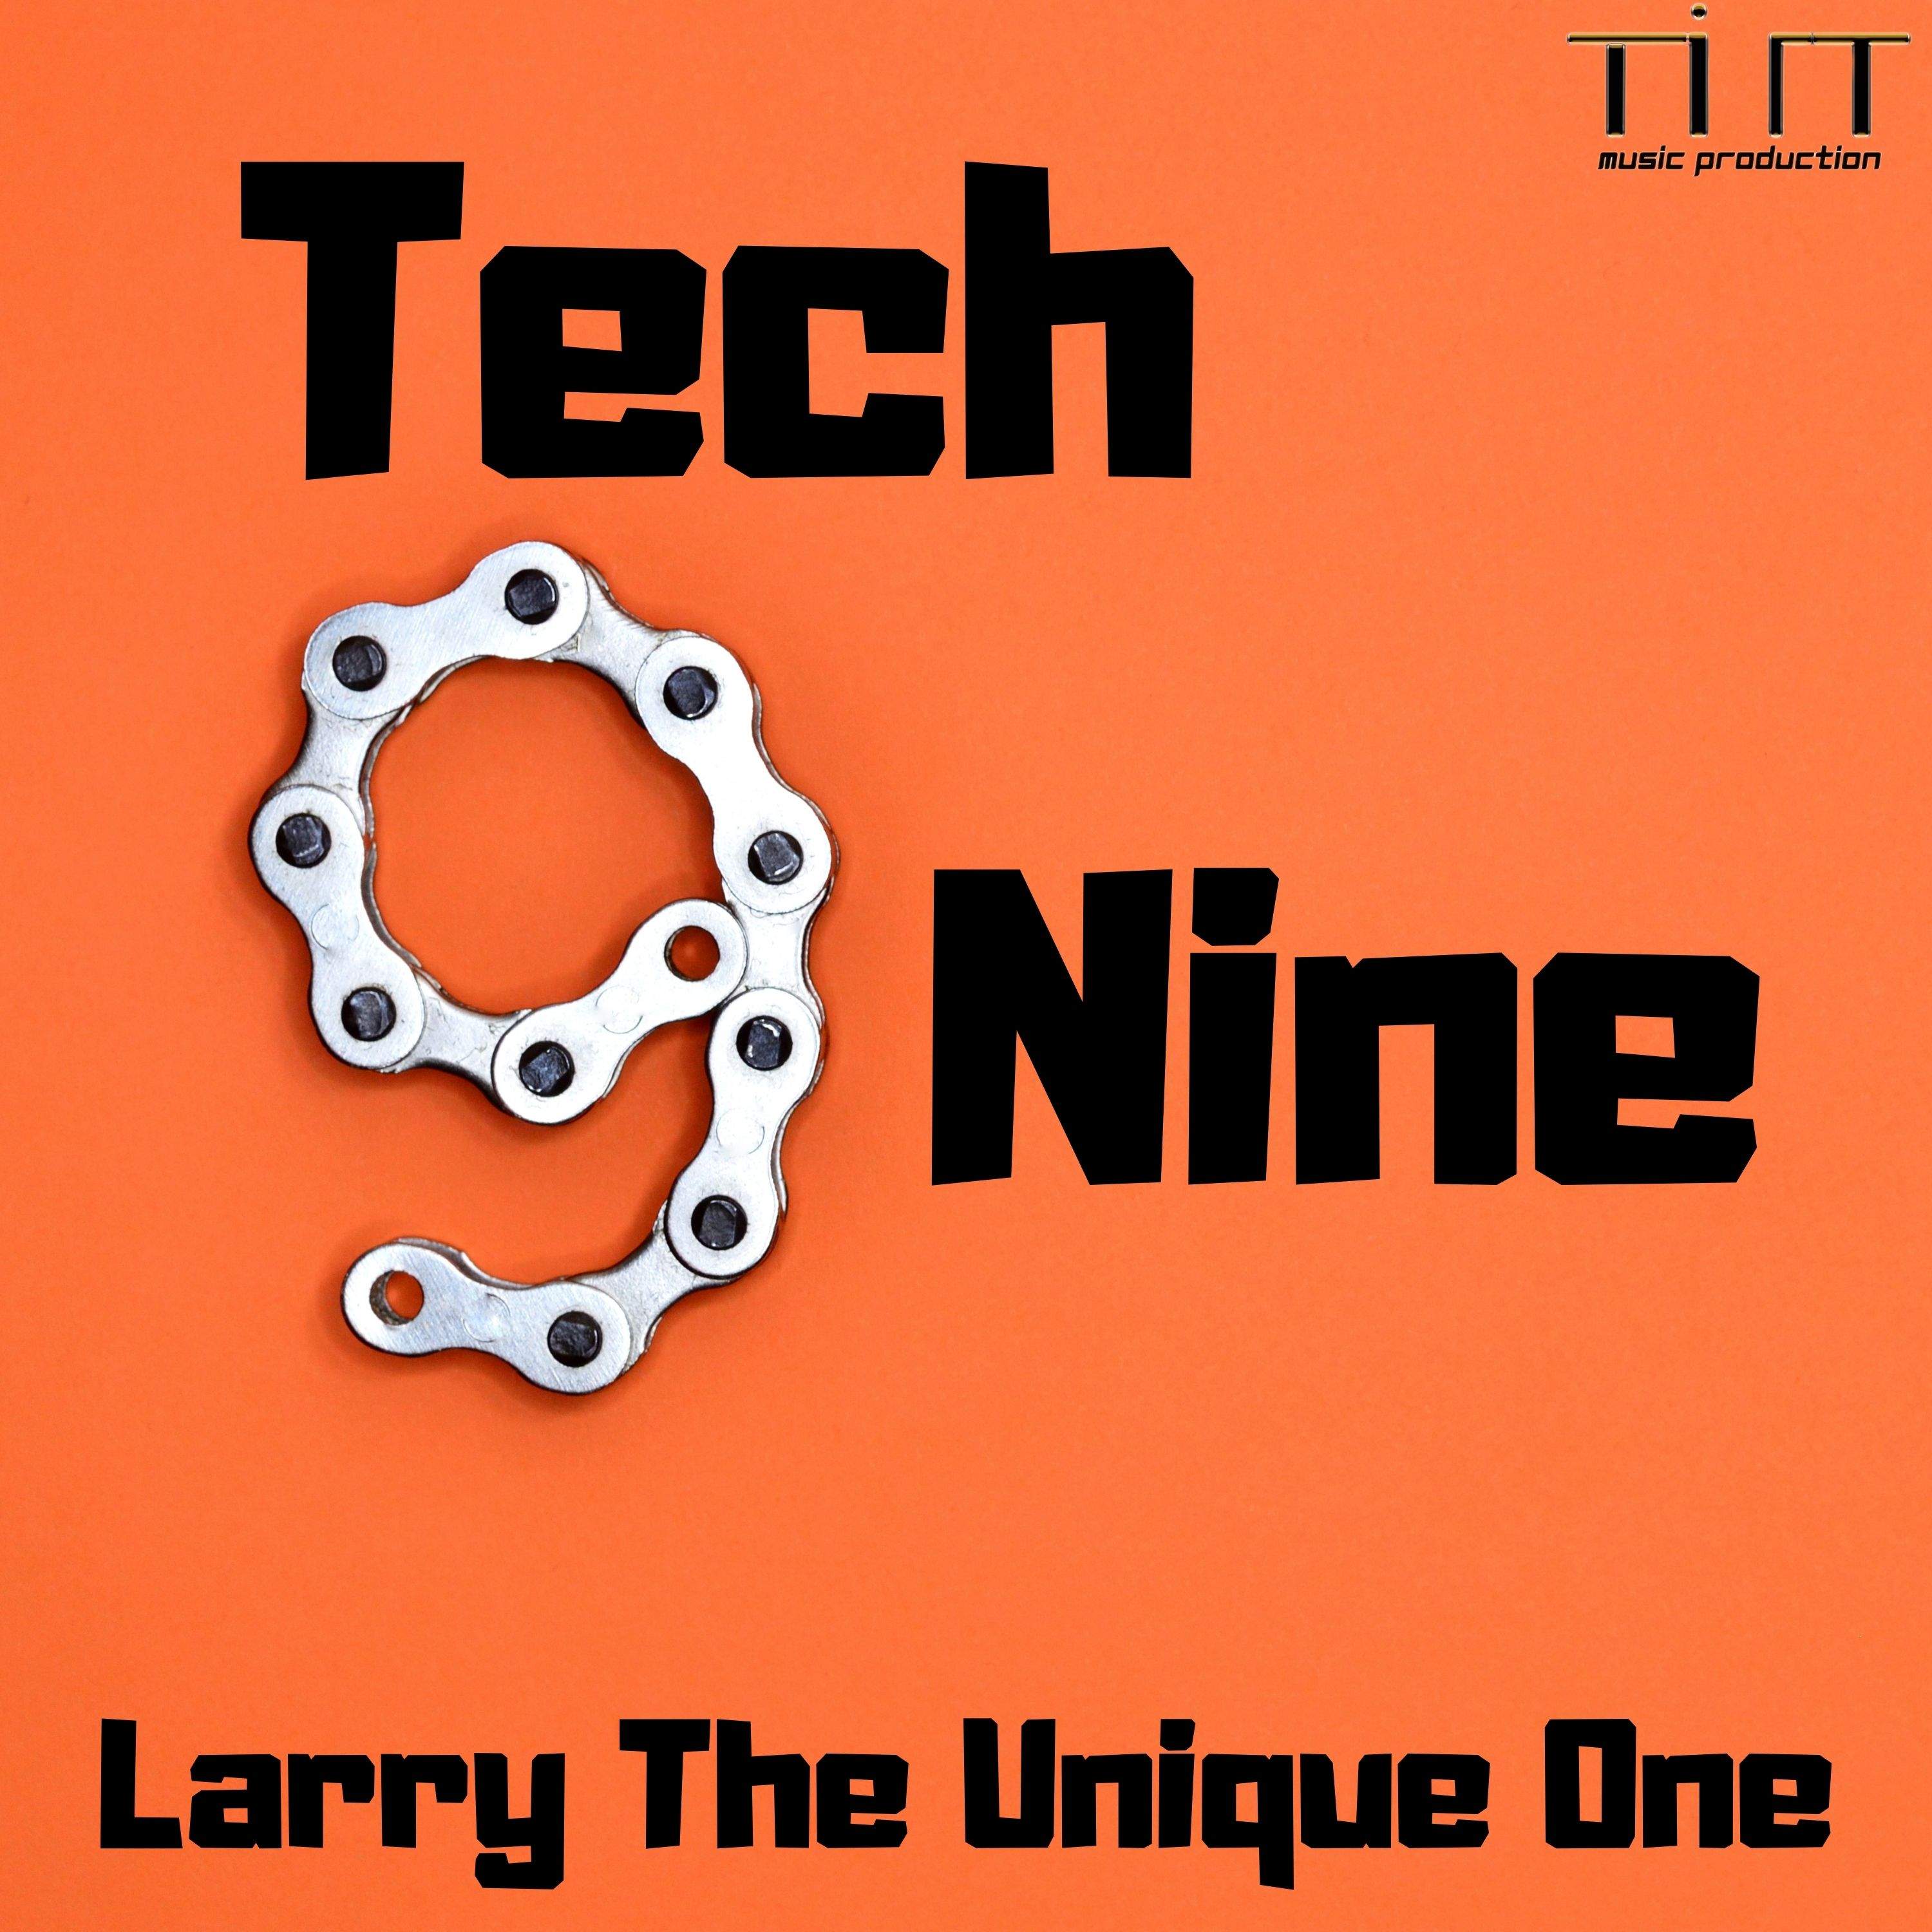 Tech Nine is the new song performed by Larry The Unique One